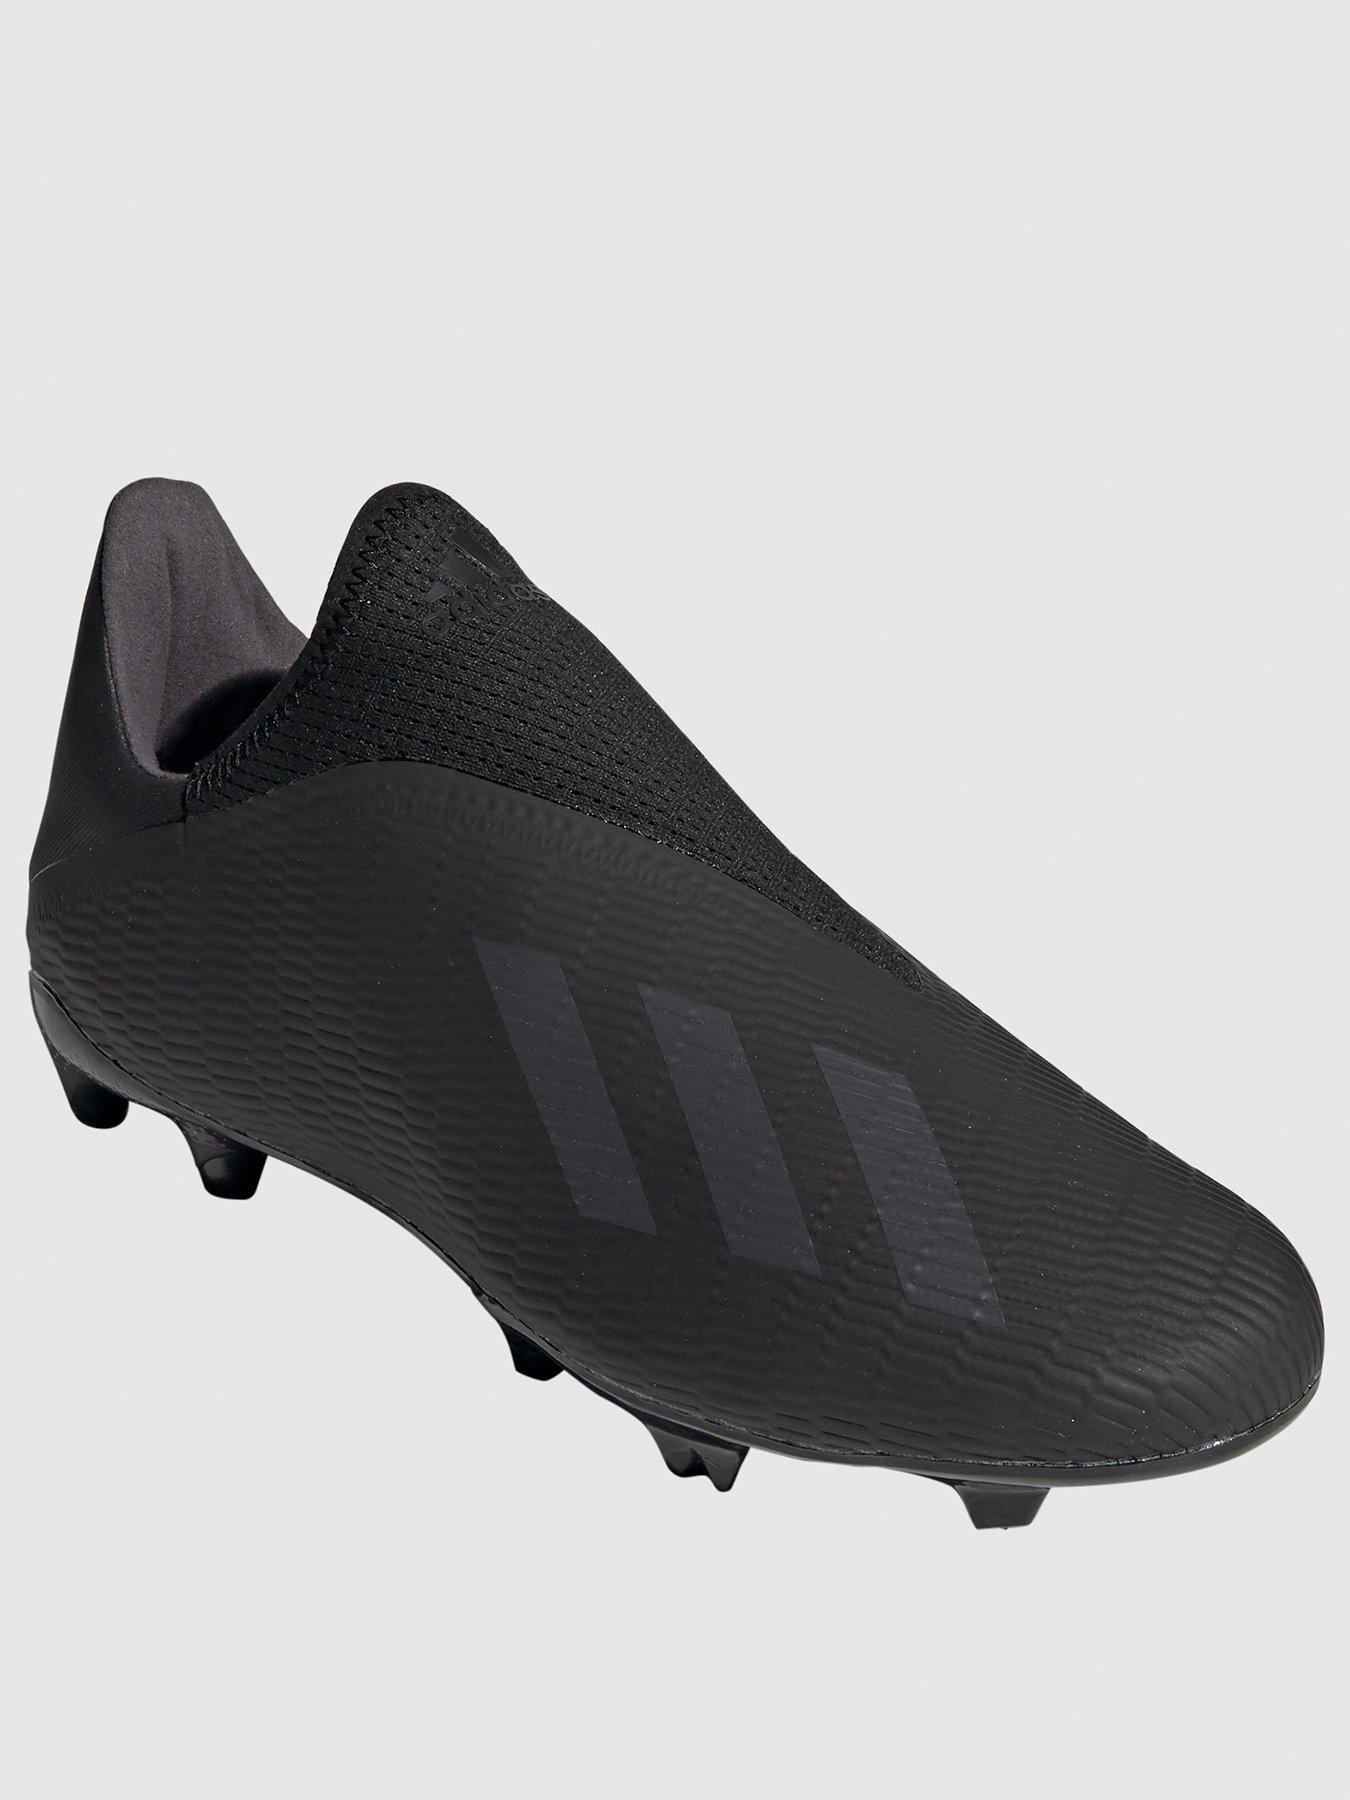 size 6 laceless football boots